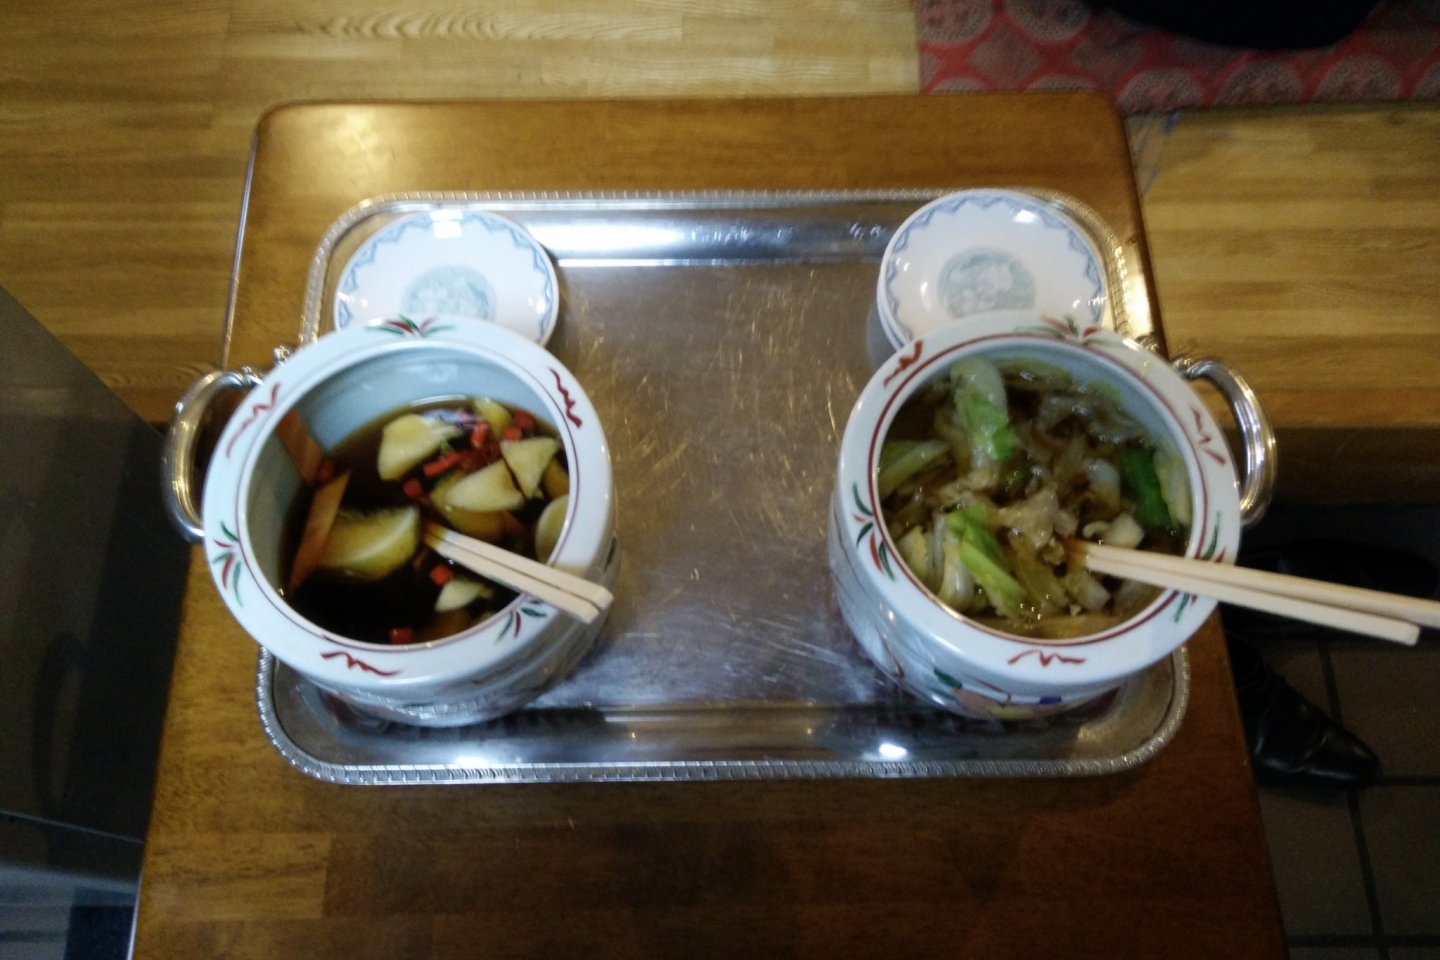 Home-made pickles that try to avoid capture